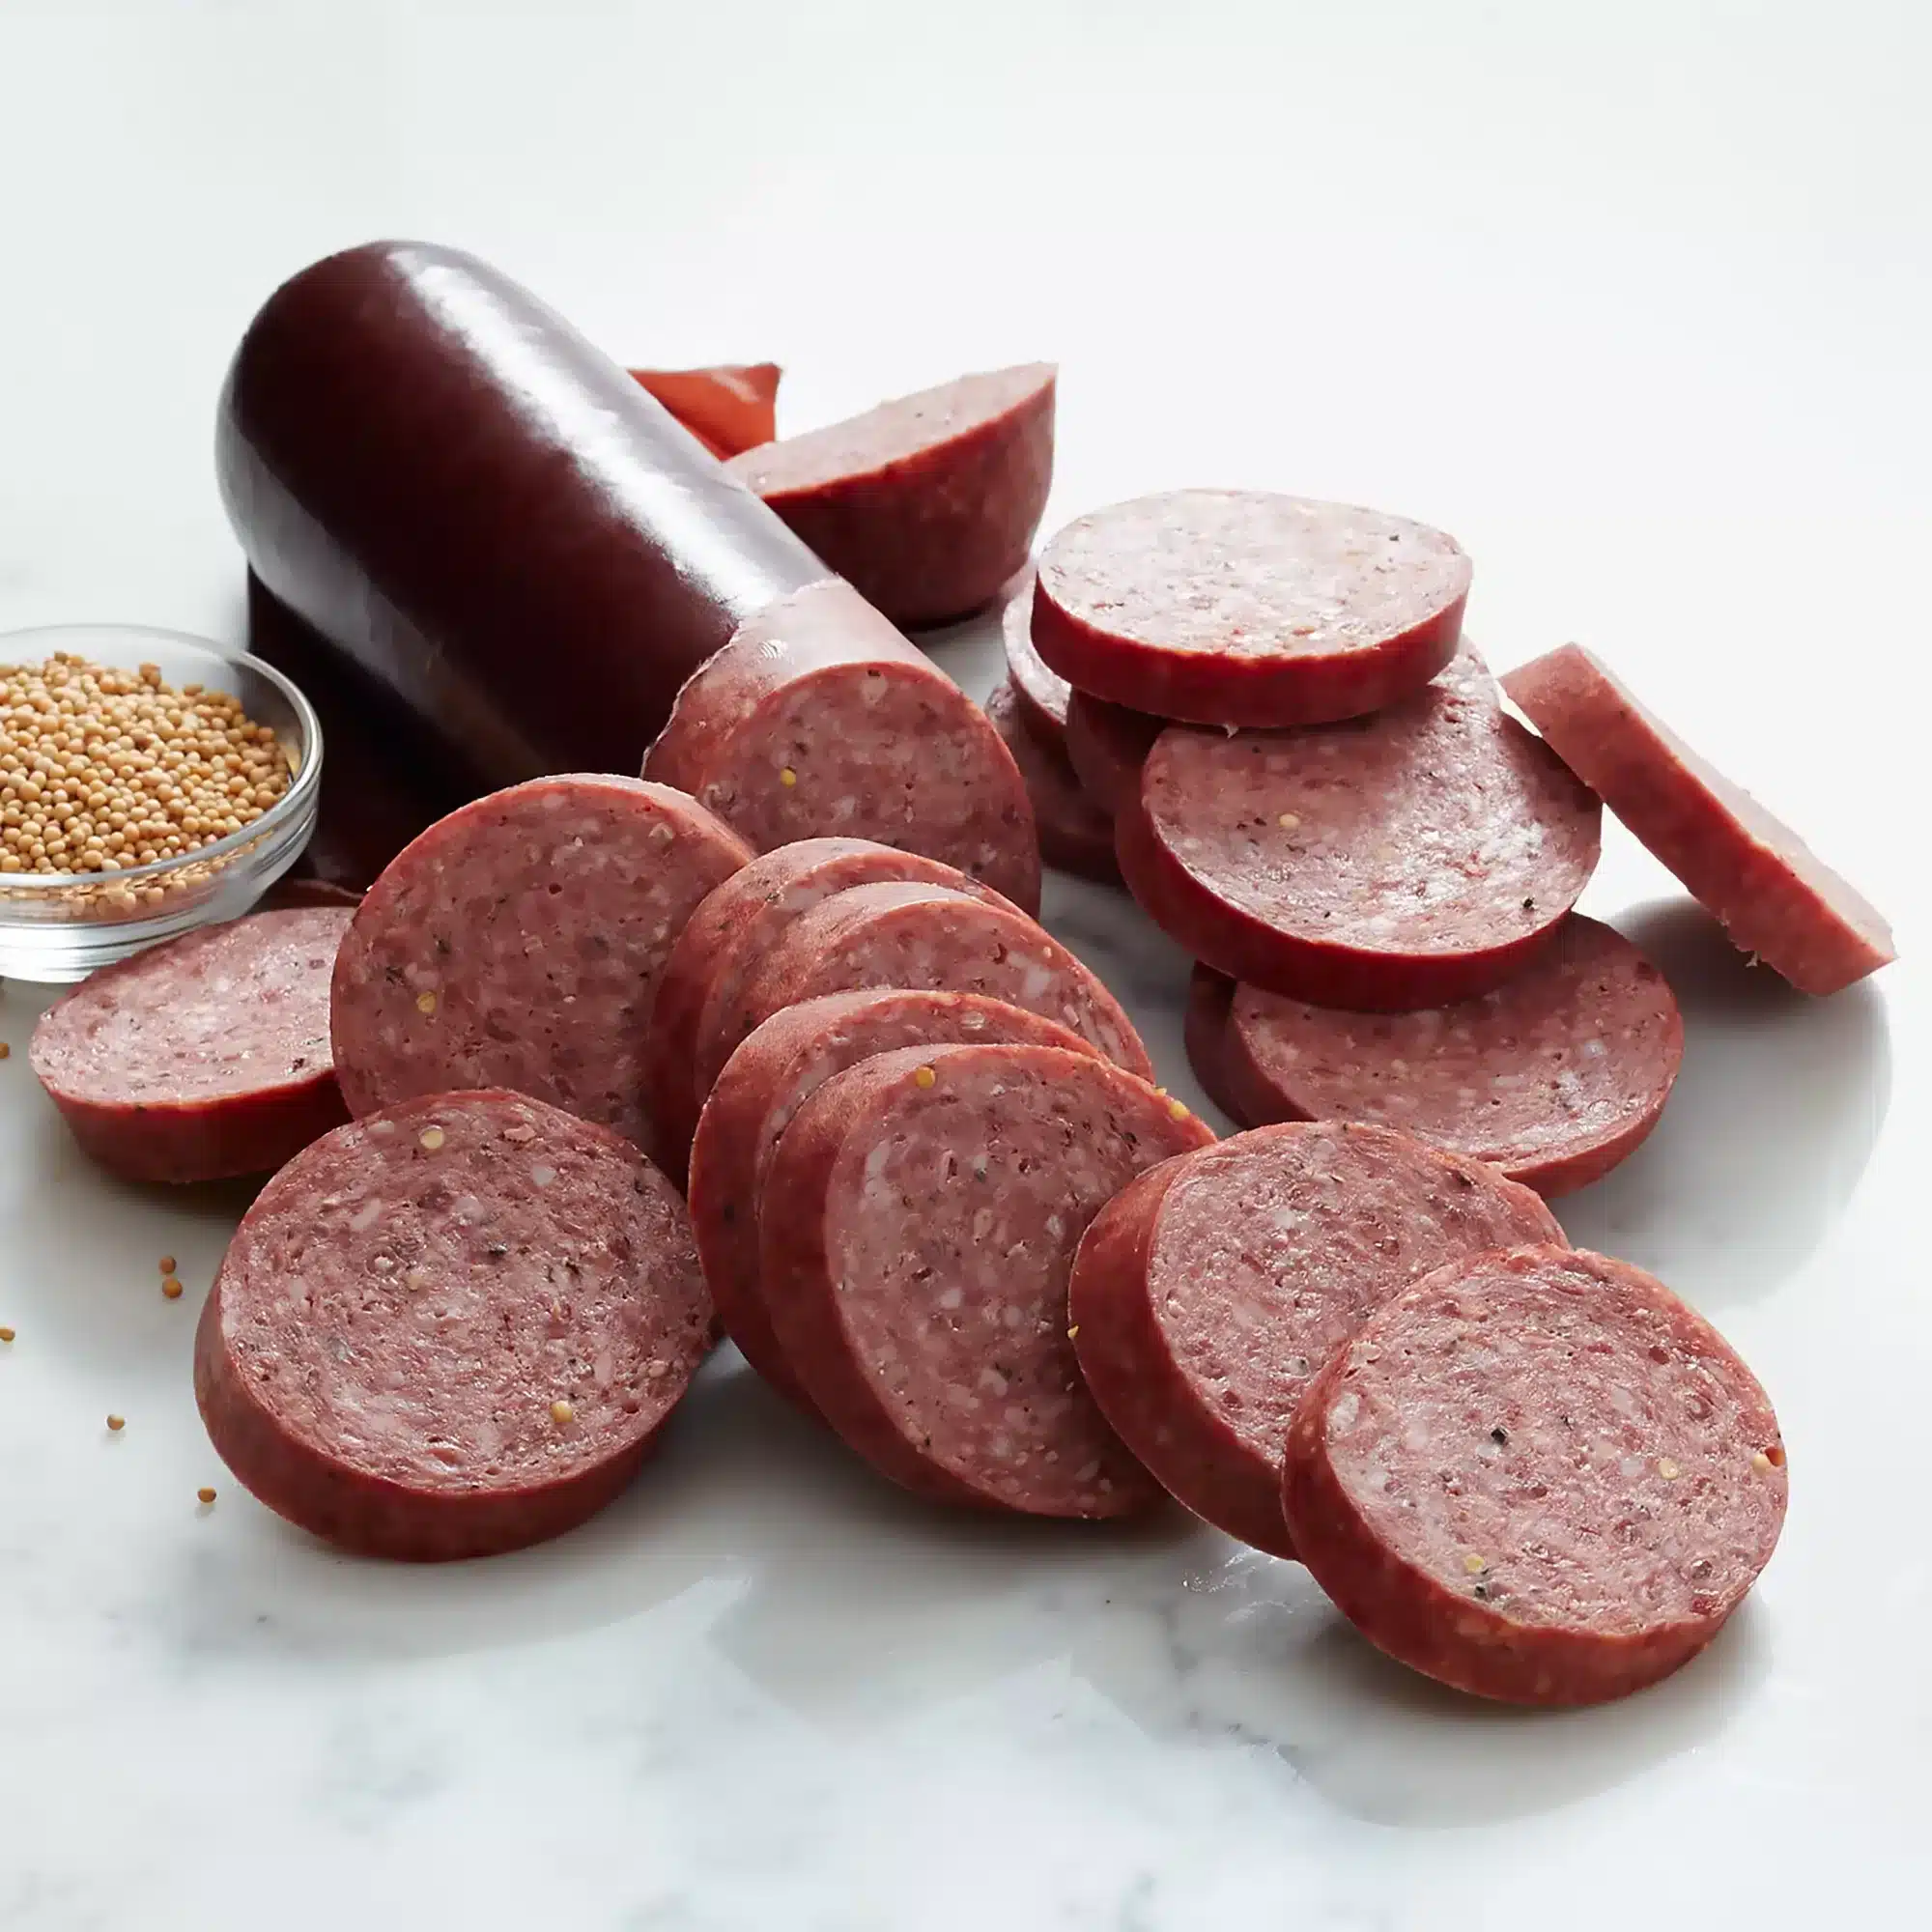 Does Summer Sausage Need To Be Refrigerated